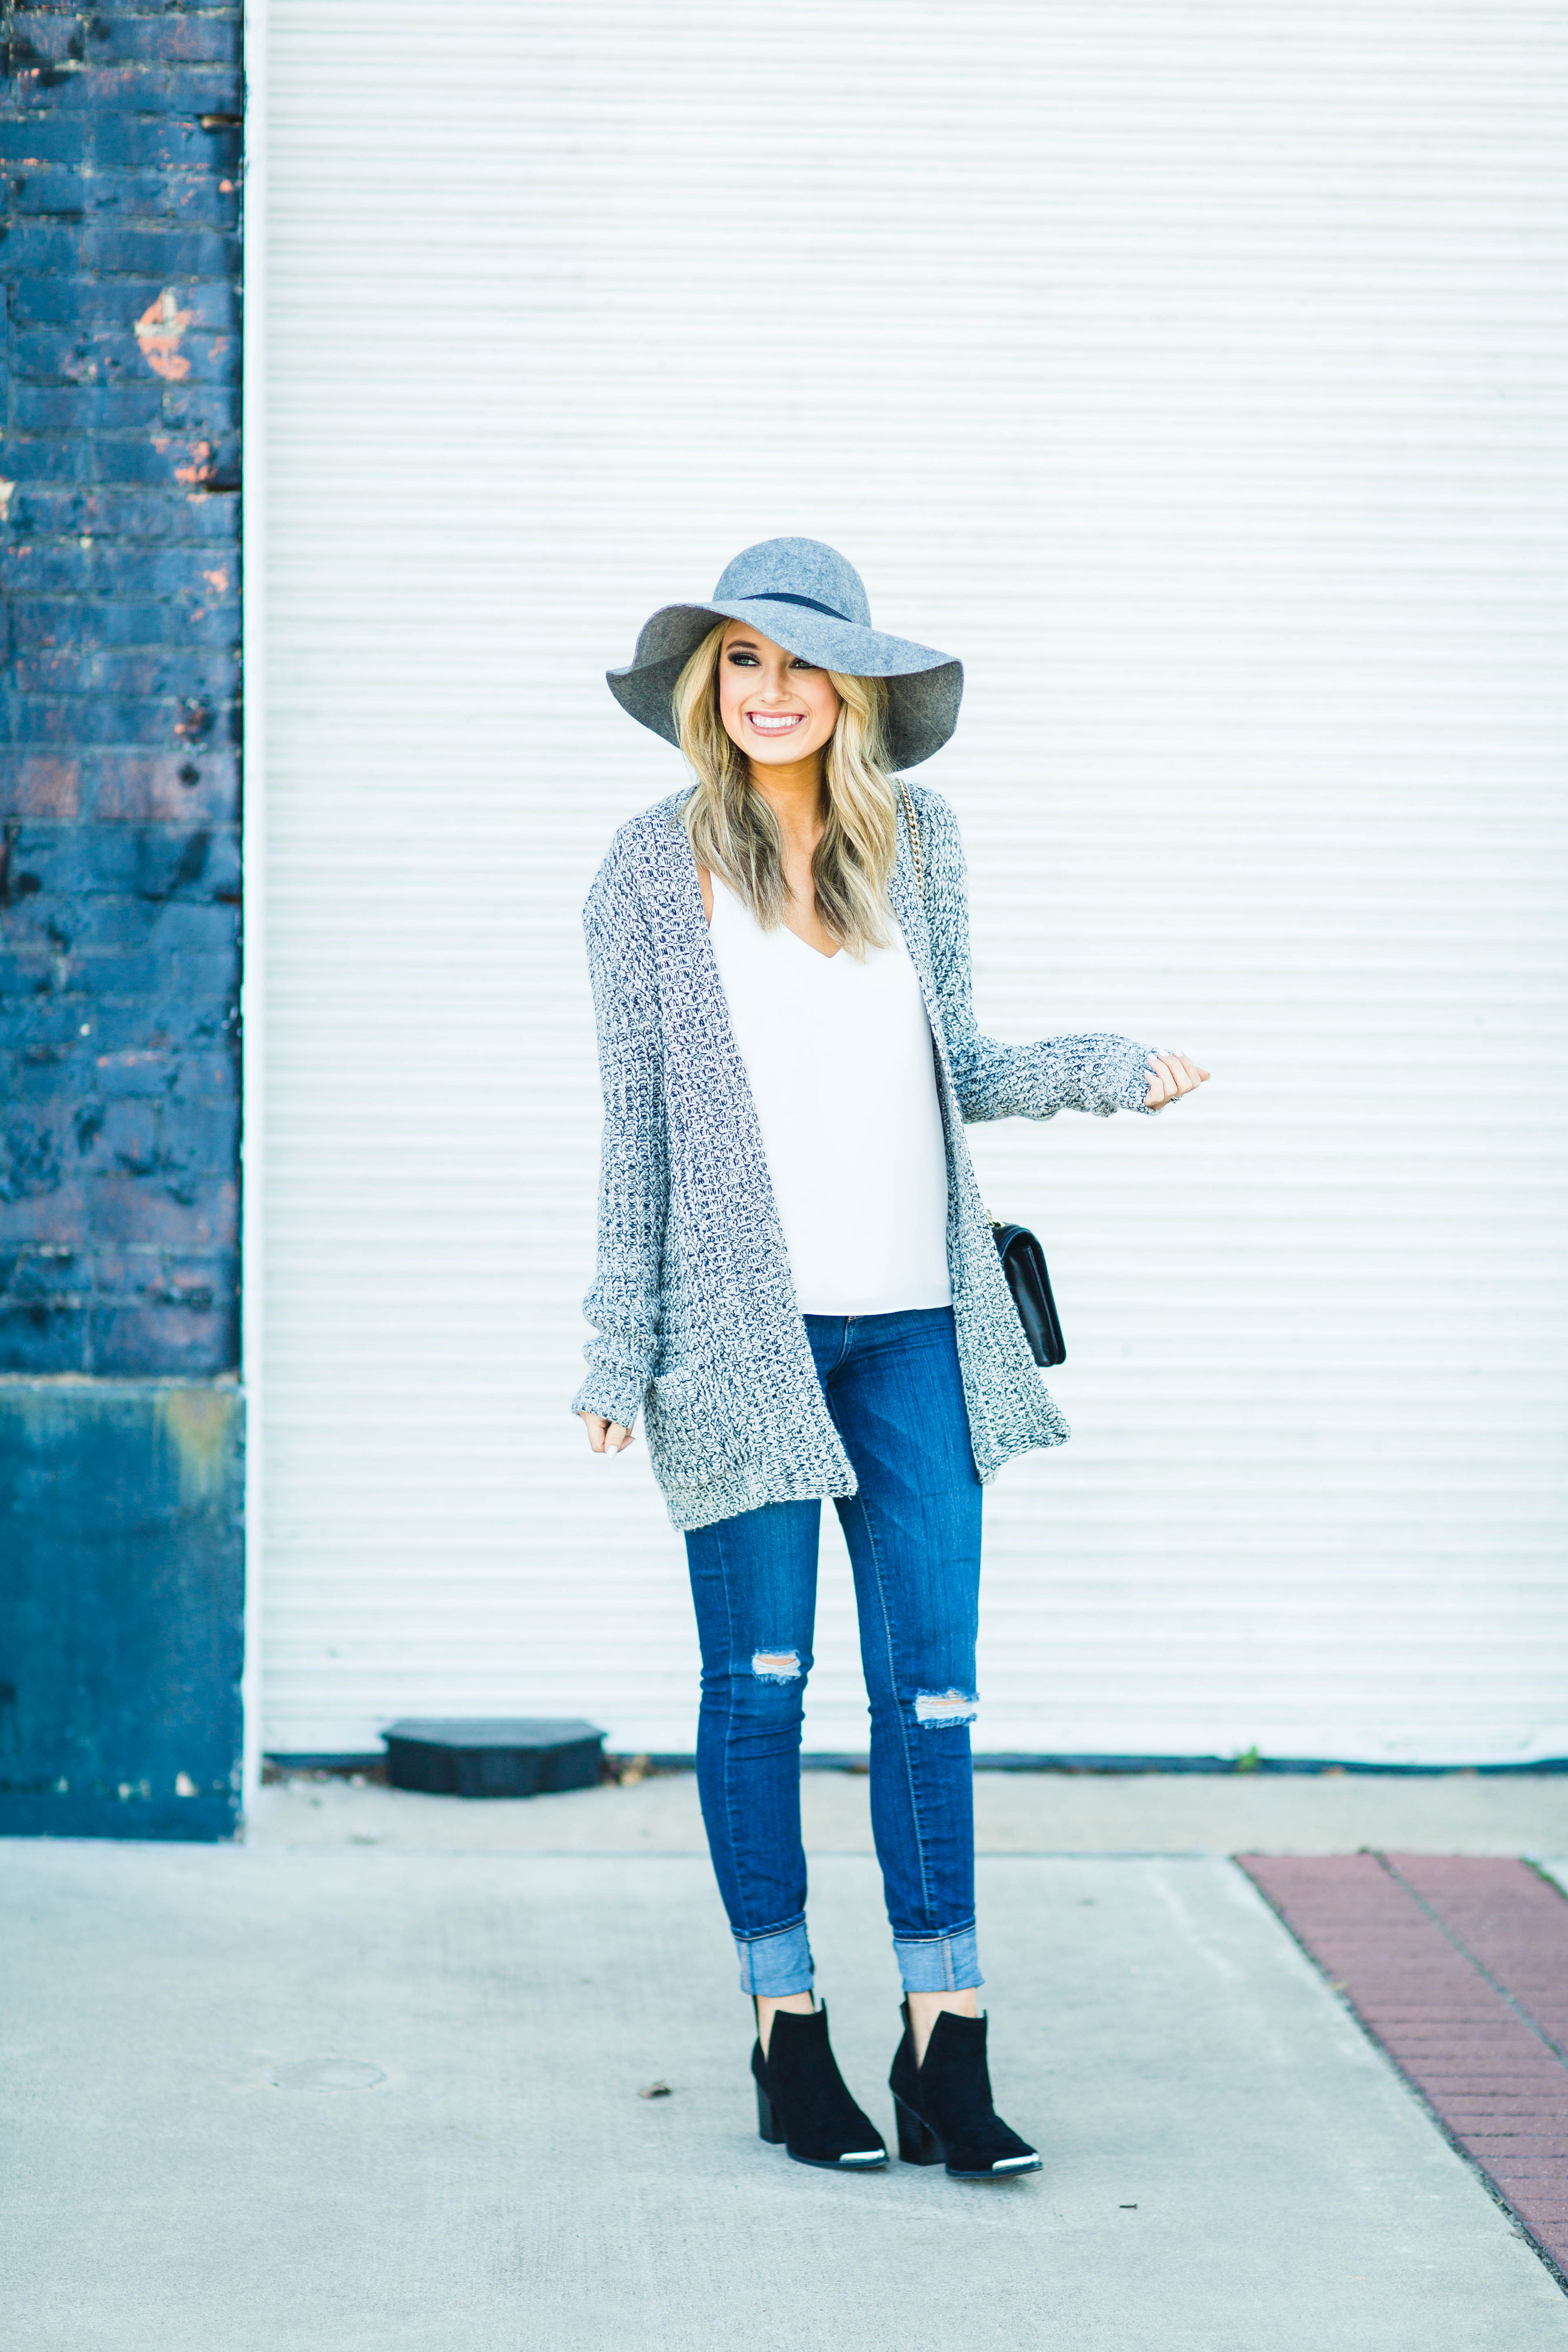 White Tank and Grey Cardigan – Champagne & Chanel